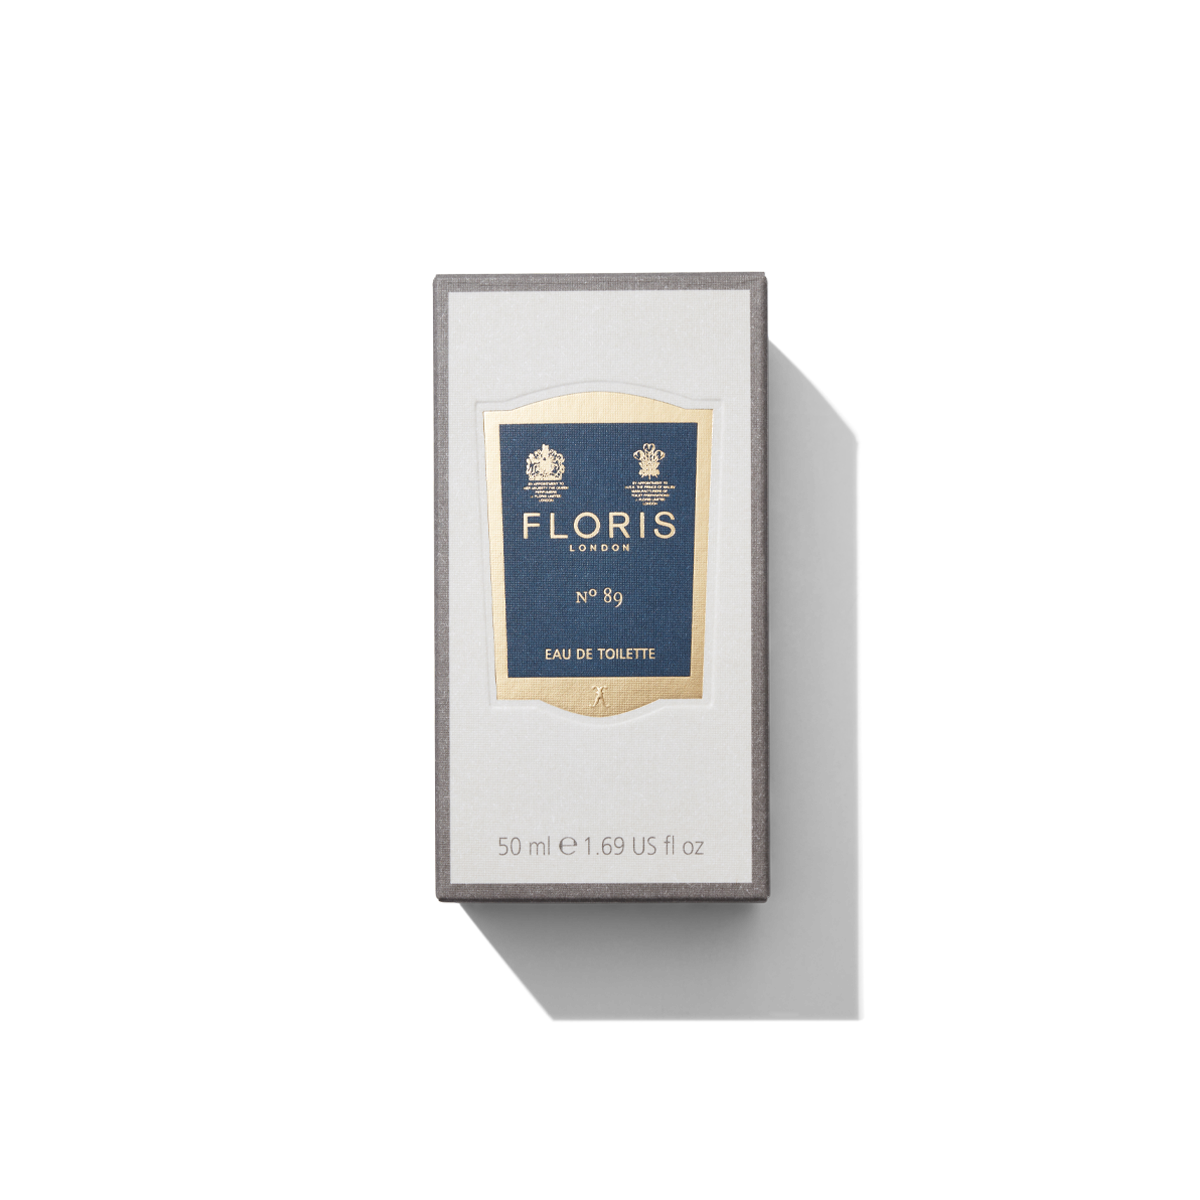 50ml White and Grey box with Navy No 89 label